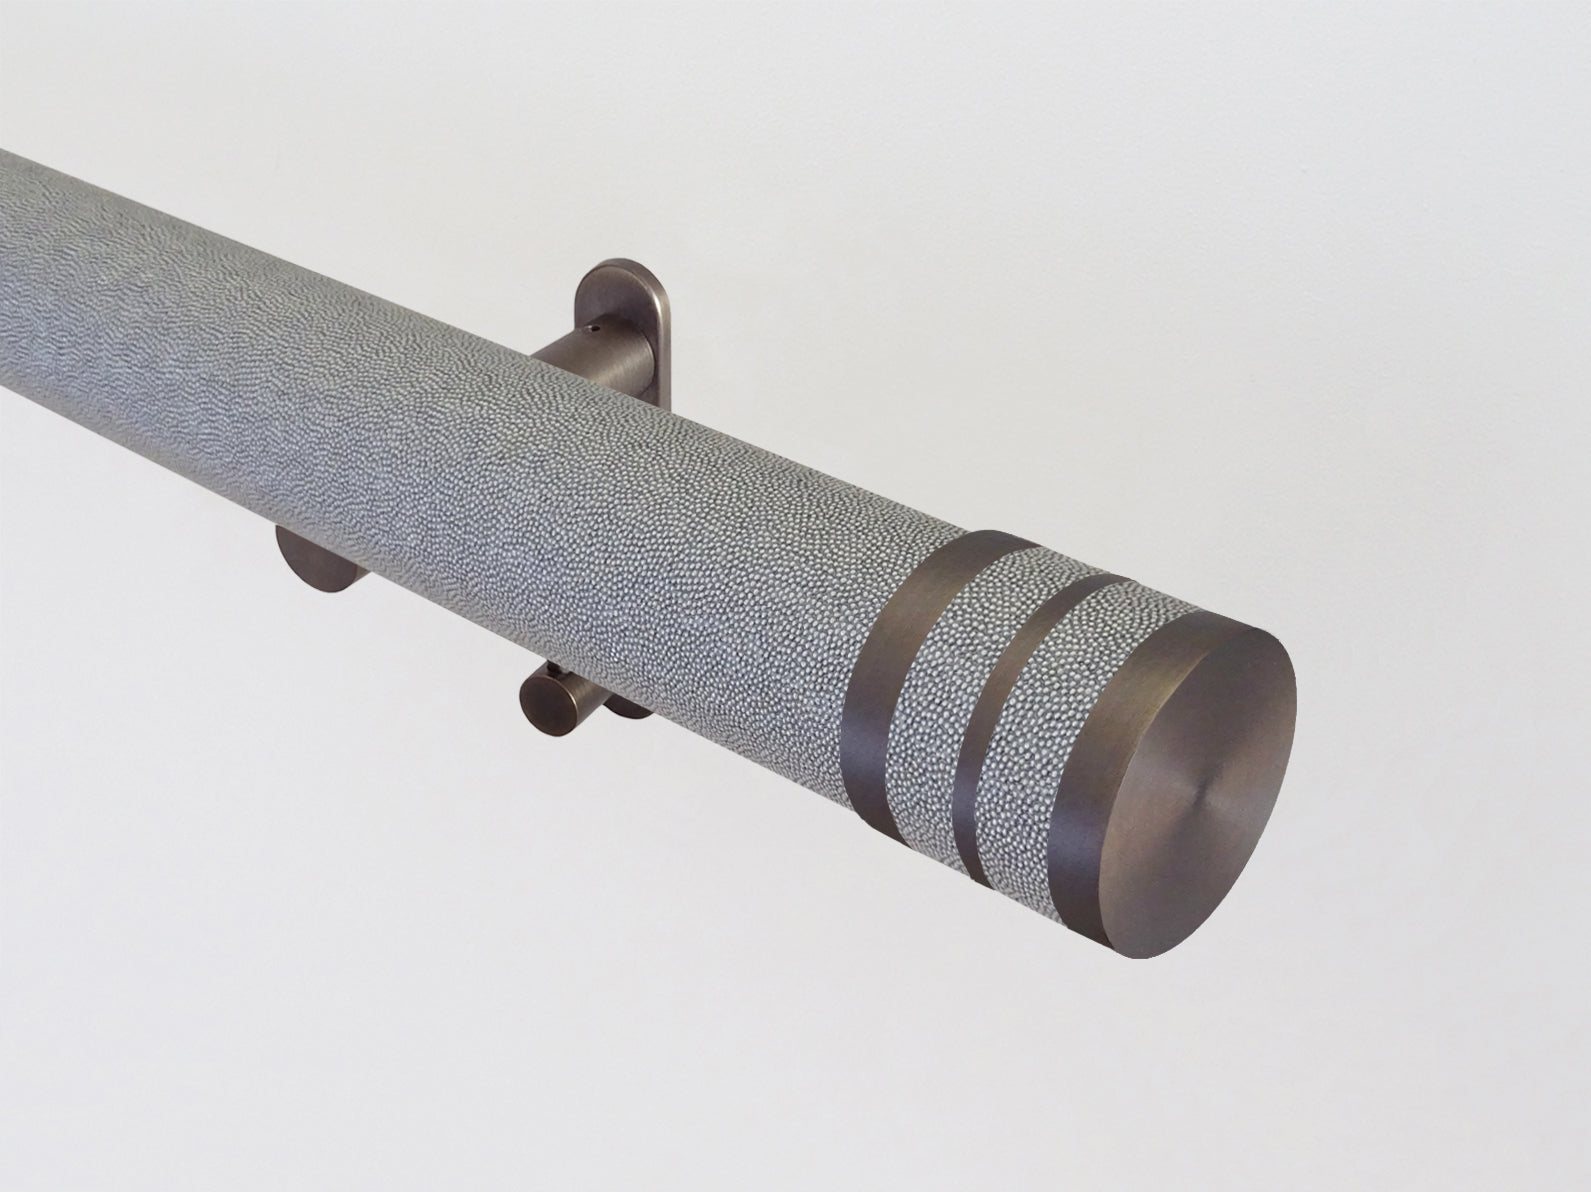 50mm diameter wrapped and tracked dusk pole with shagreen dusk bobbin finials